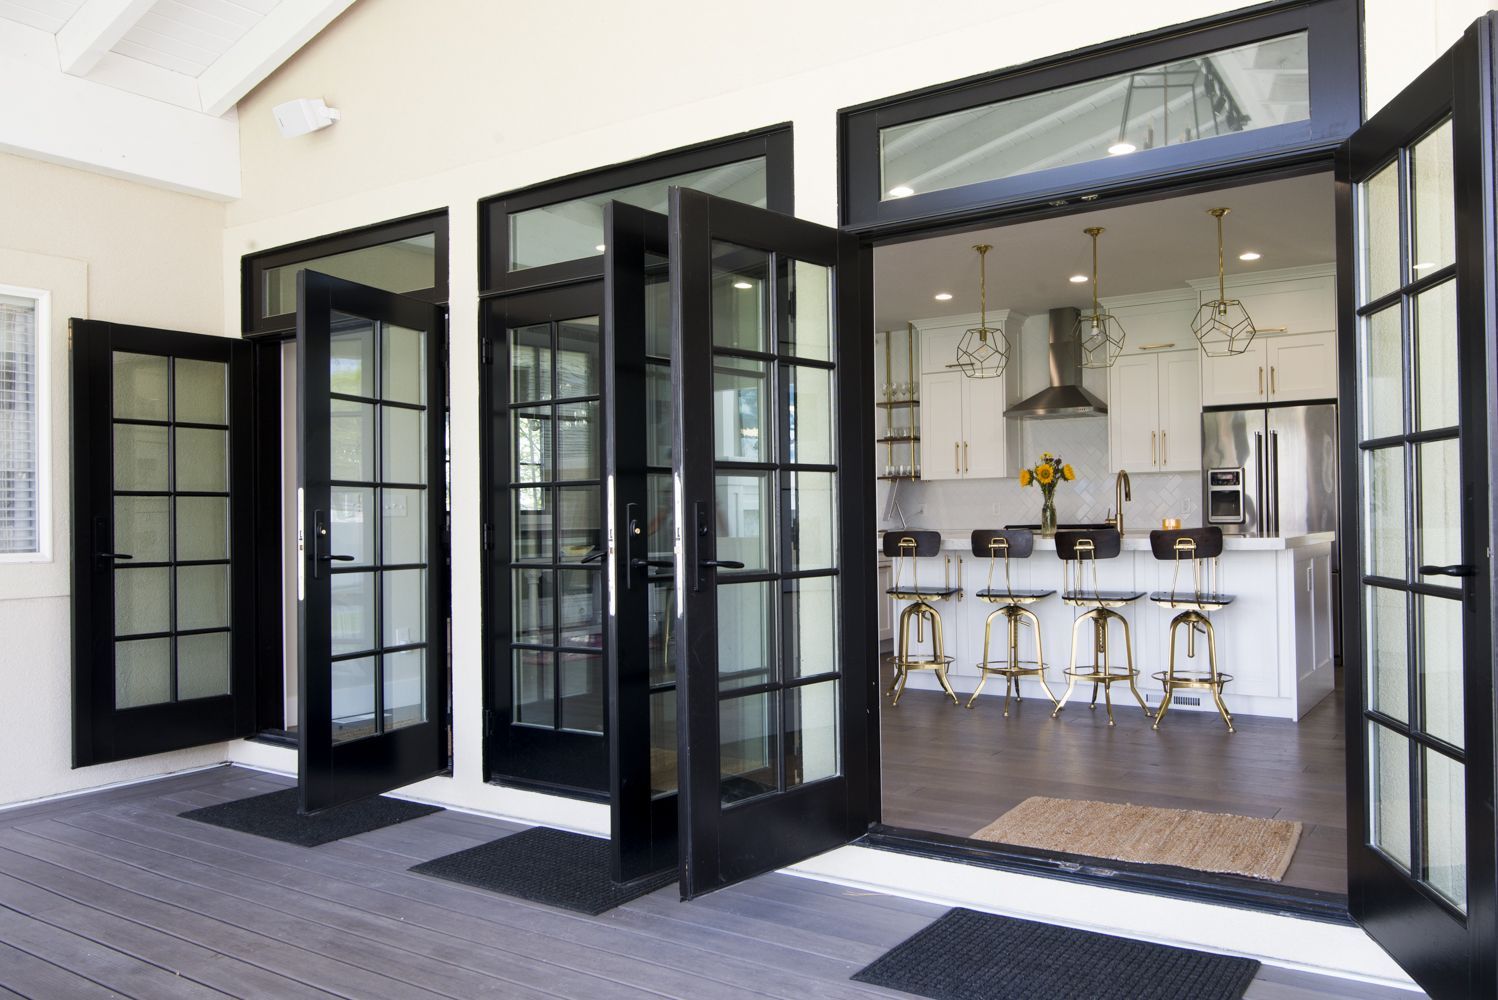 Triple french doors off the kitchen open up to let the outdoors in. Patio porch deck ideas. Home decor. black french doors -   22 patio door decor
 ideas